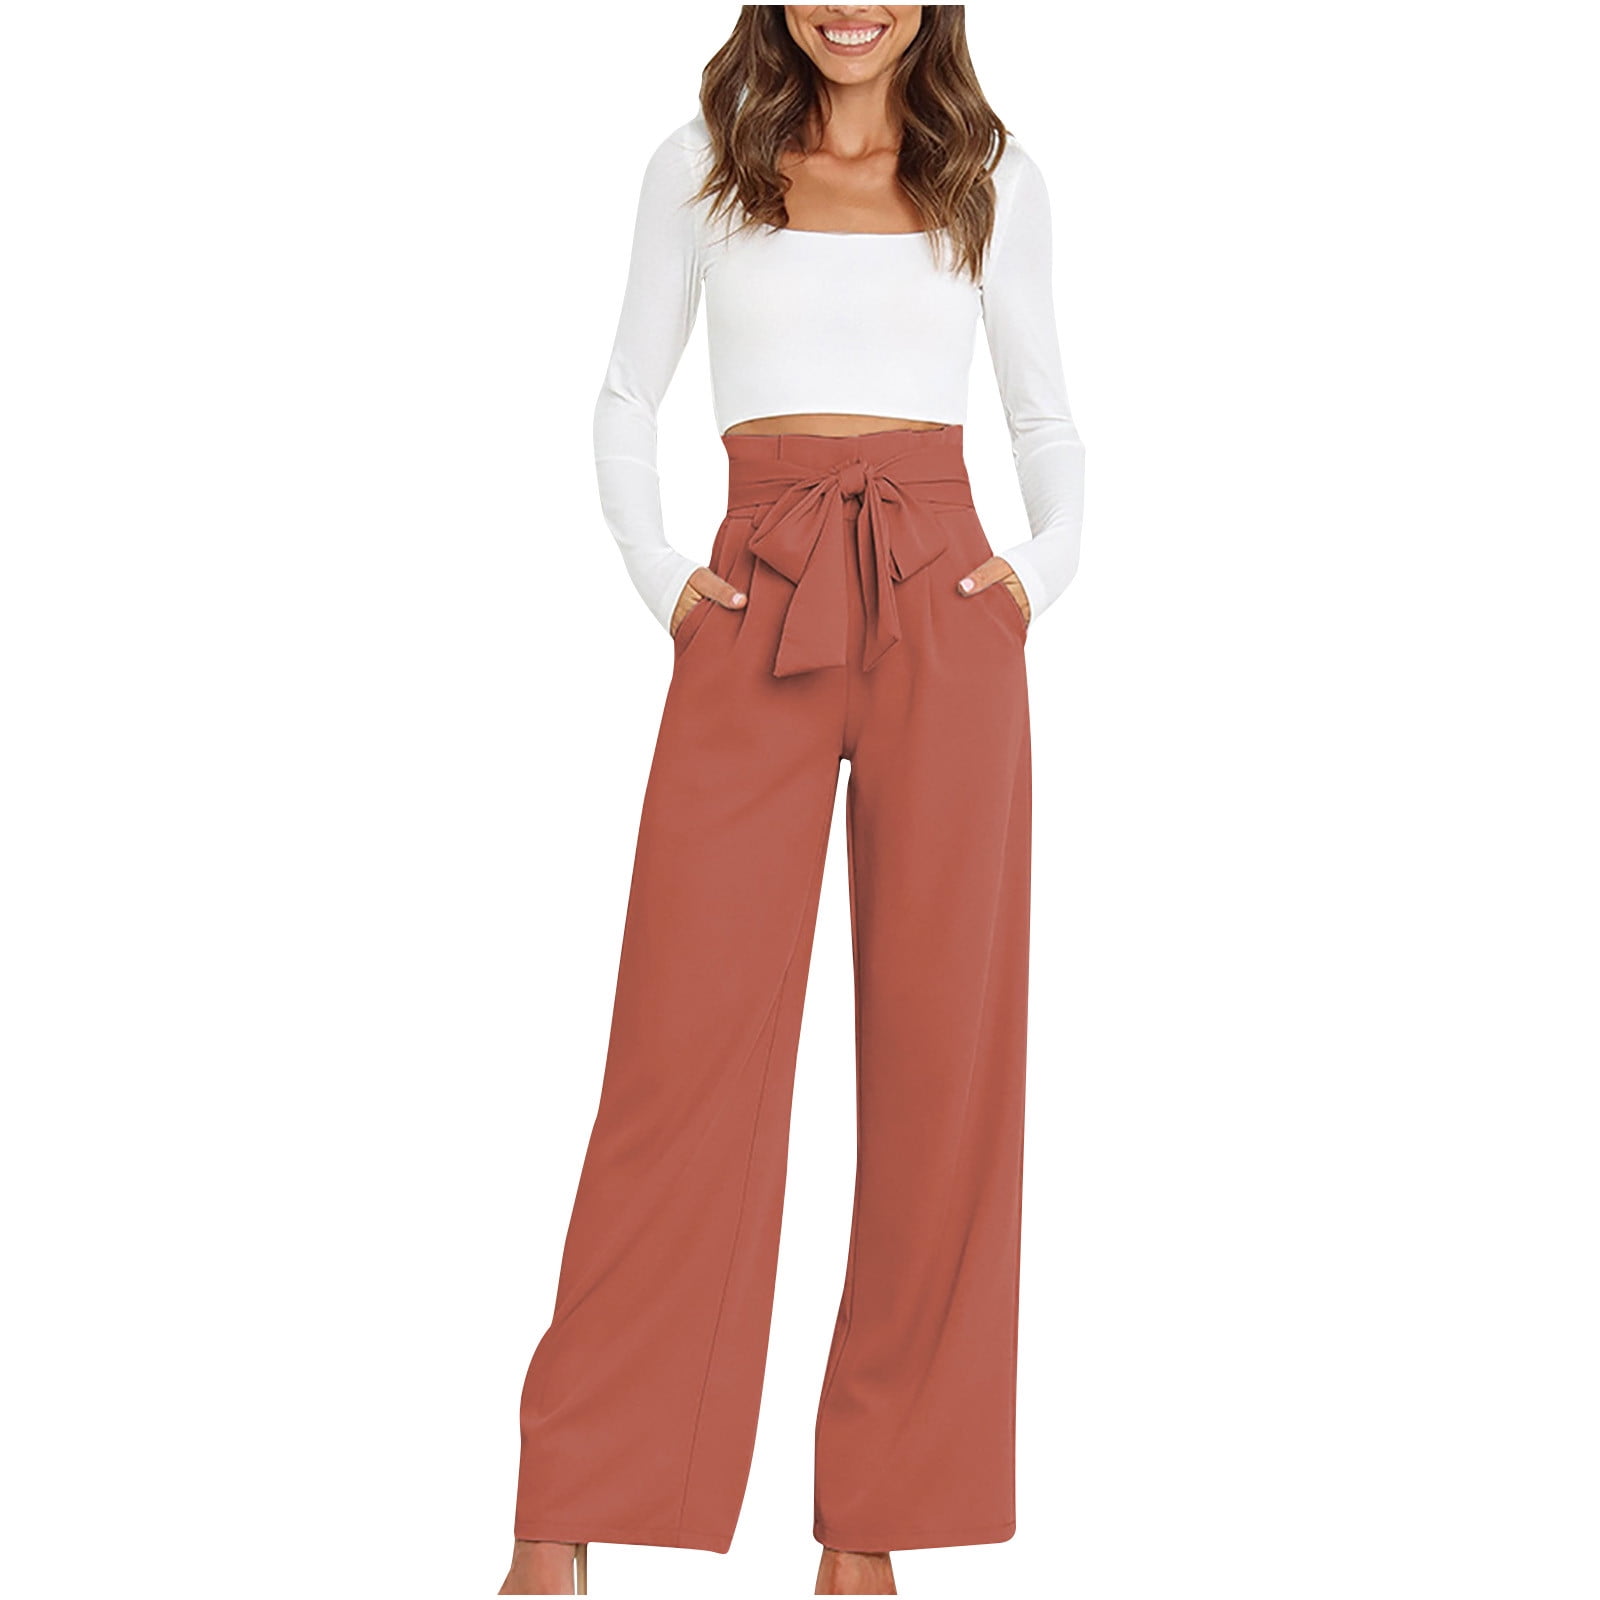 QUYUON Womens Tall Pants Clearance Solid Color High-Waist Loose Wide Leg  Pants High Waisted Pants Full Length Pant Leg Workwear Style P1157 Orange  XXL 